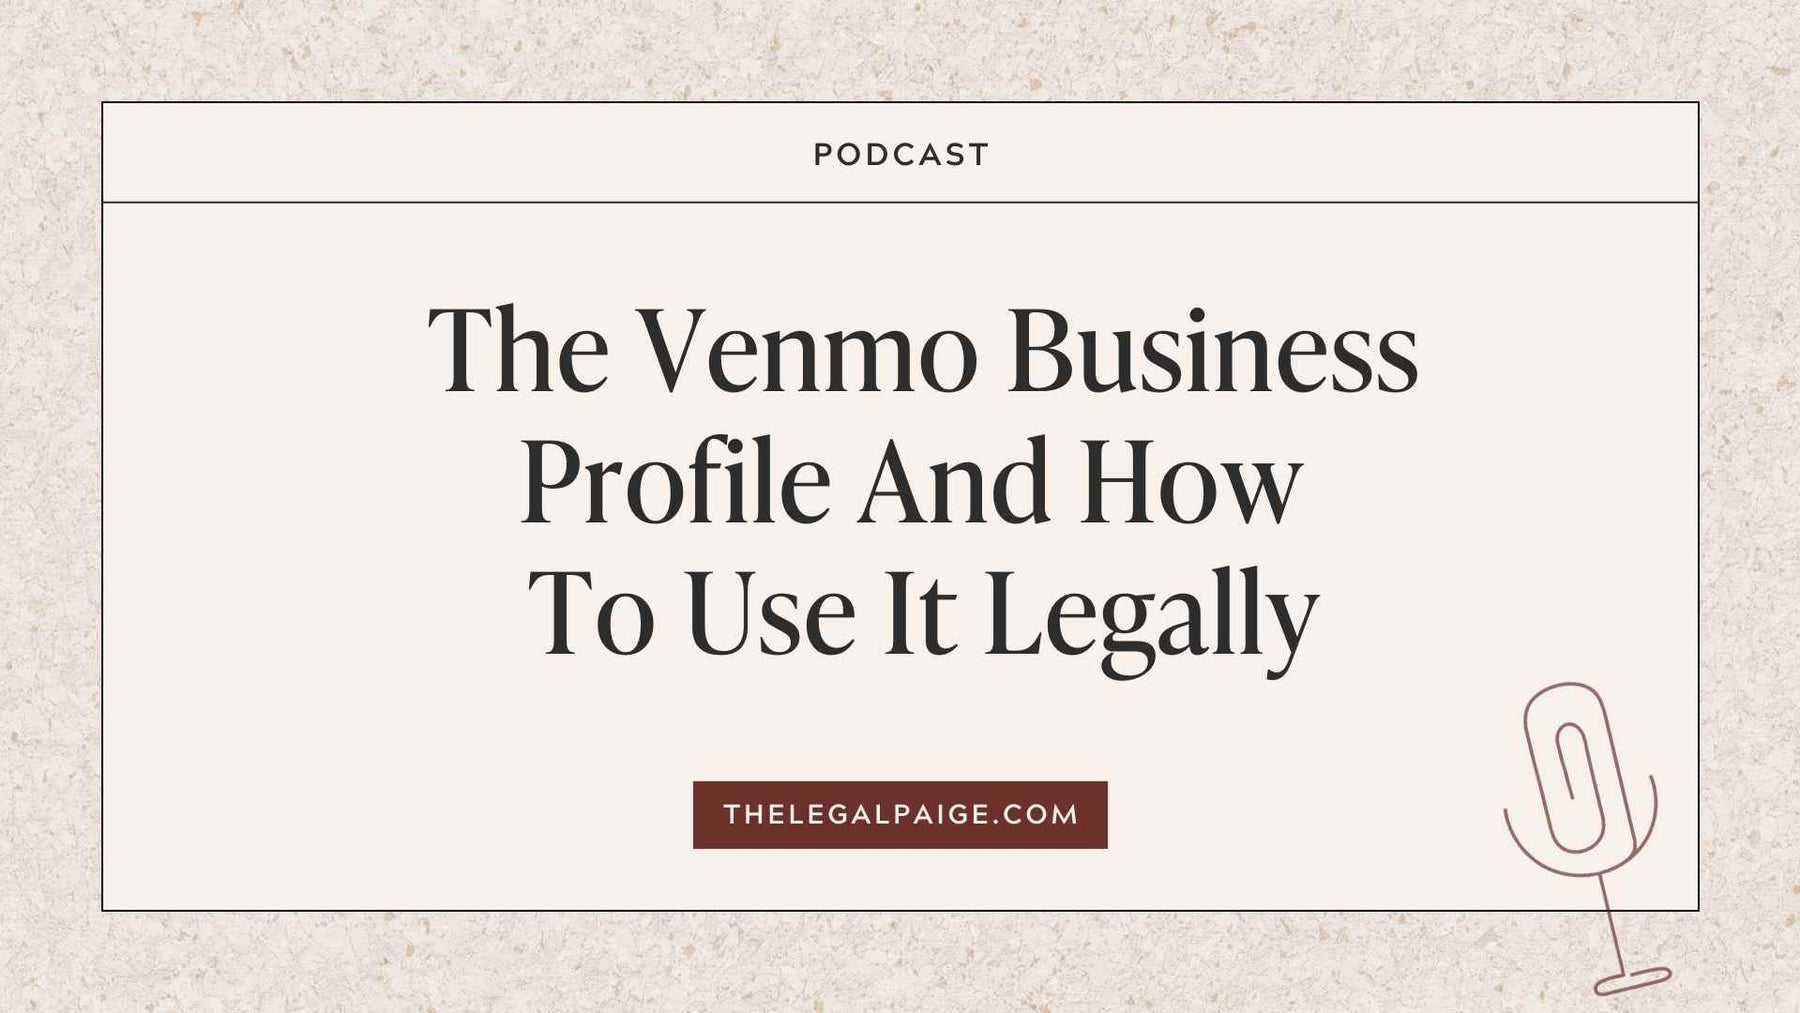 Episode 80: The Venmo Business Profile And How To Use It Legally